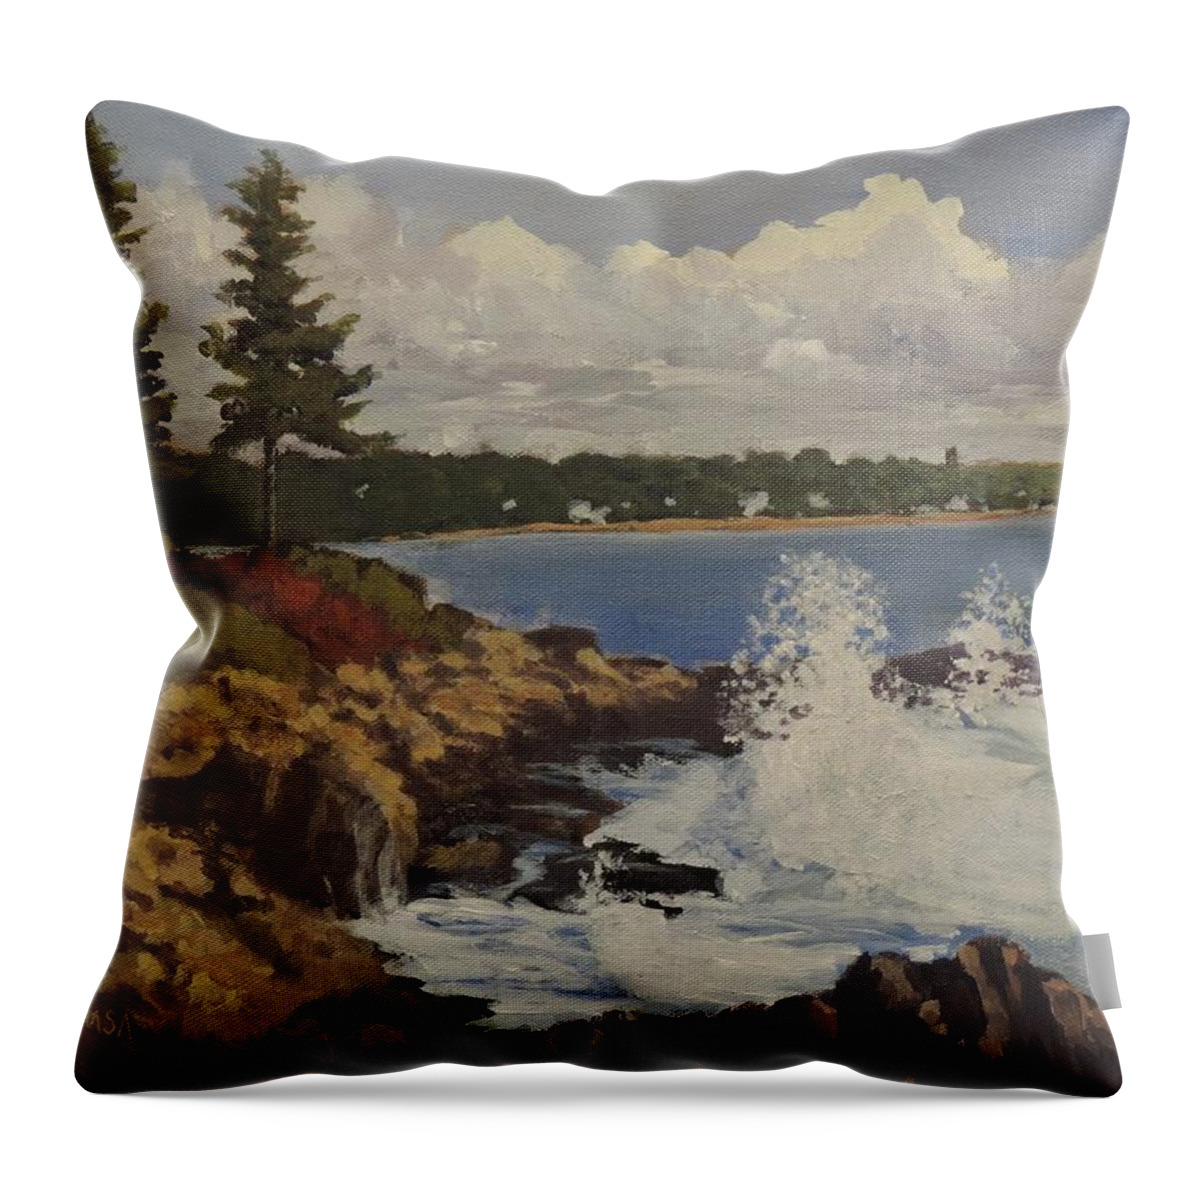 Seacoast Pines Throw Pillow featuring the painting Seacoast Pines by Bill Tomsa